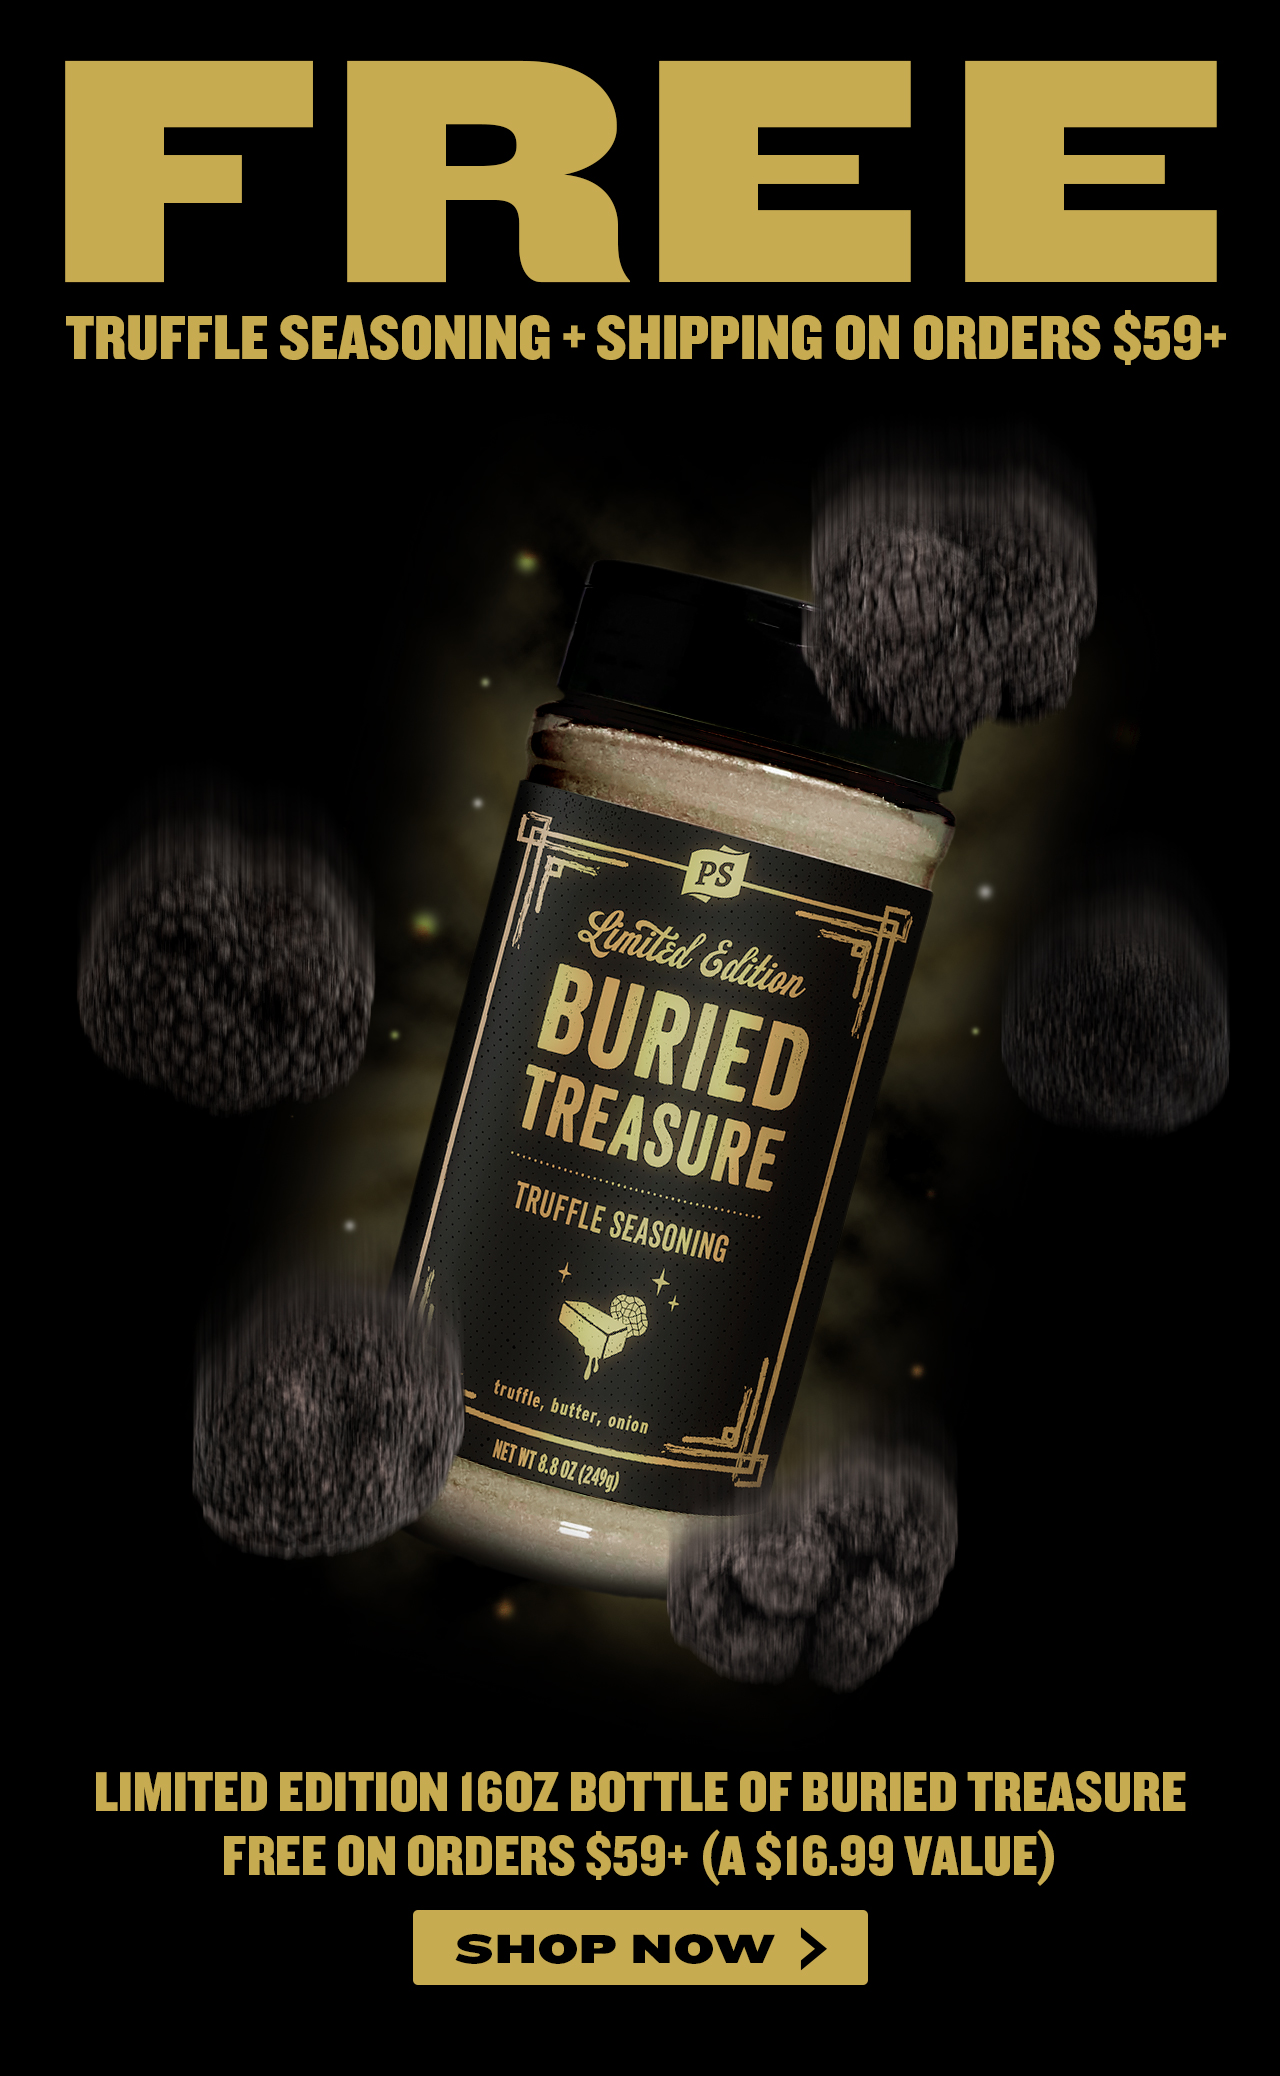 FREL TRUFFLE SEASONING SHIPPING ON ORDERS $59 LIMITED EDITION 160Z BOTTLE OF BURIED TREASURE FREE ON ORDERS $59 A $16.99 VALUE SHOP NOW 